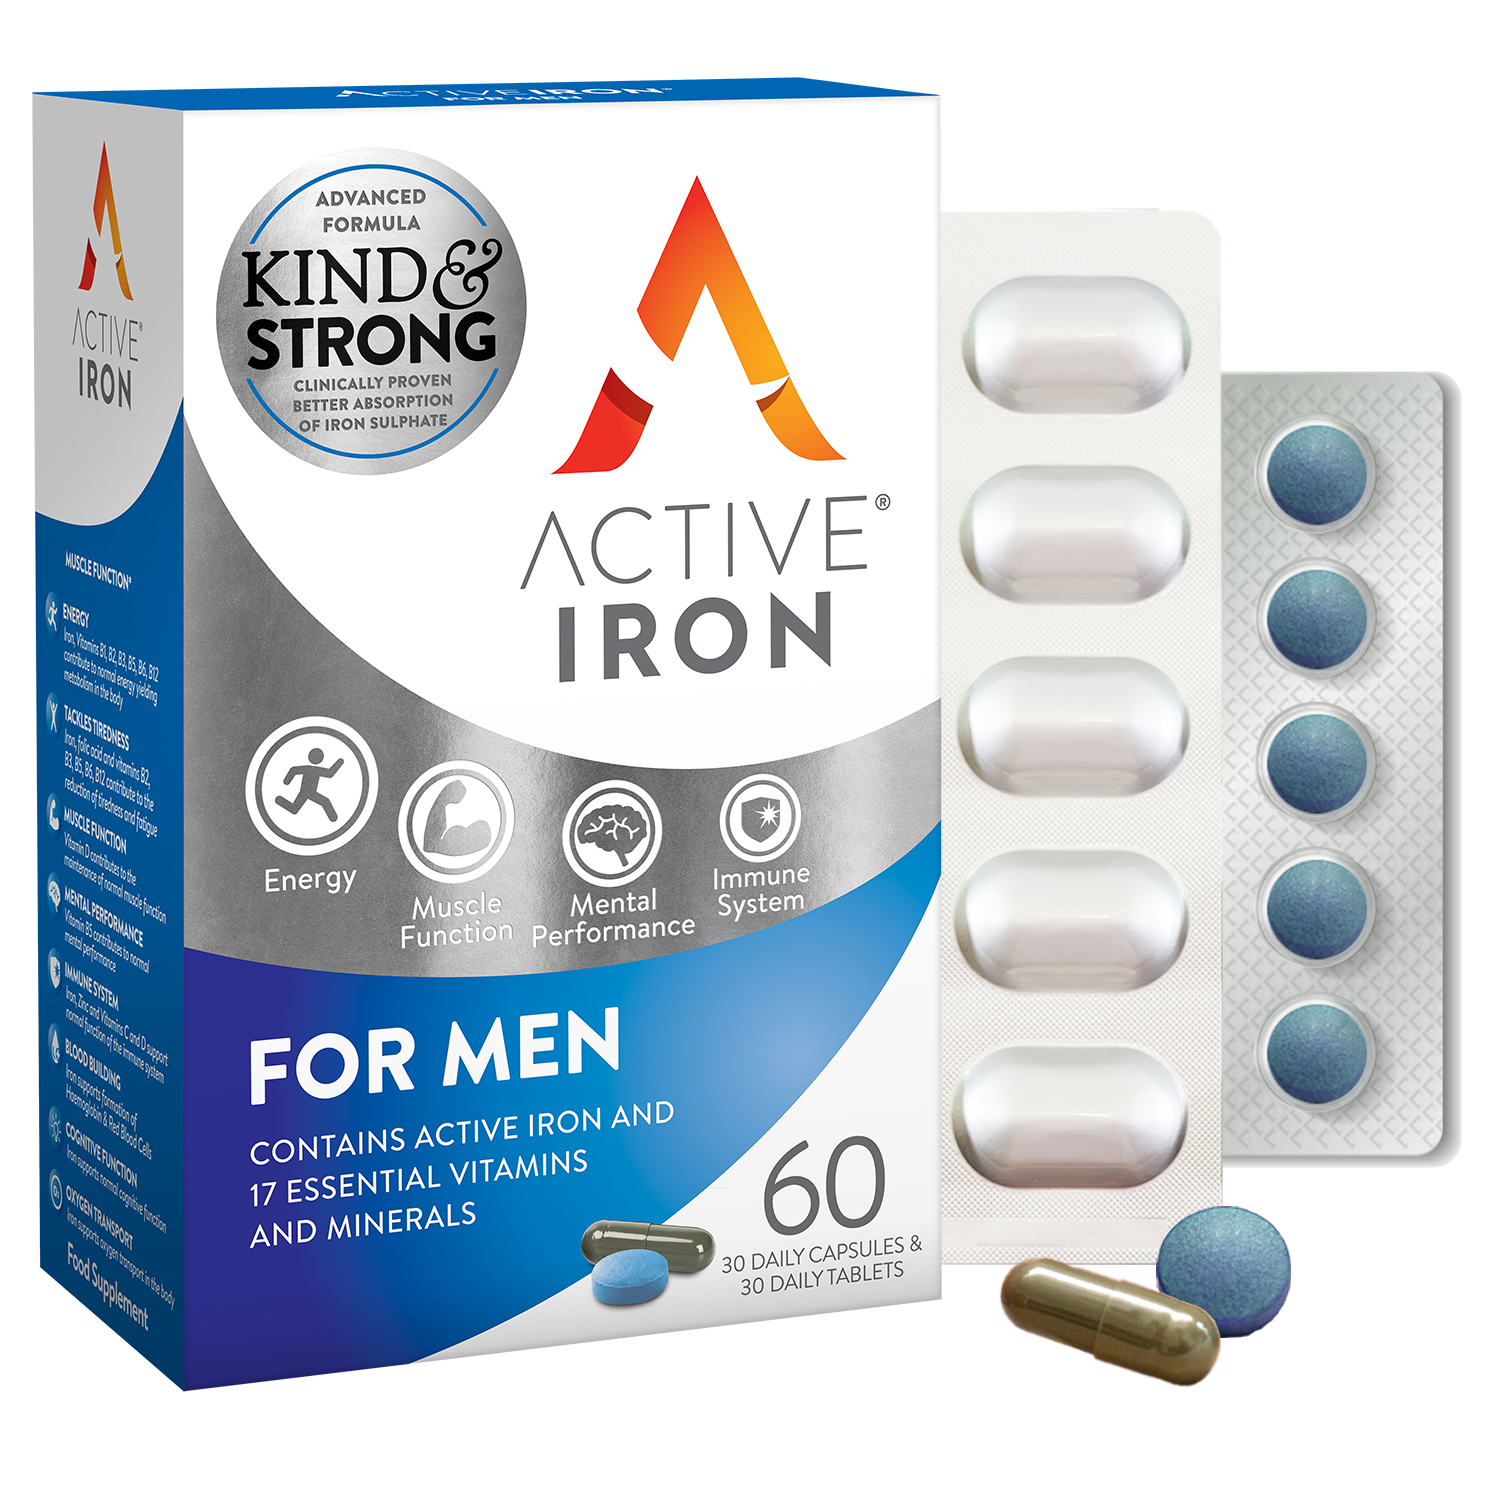  active iron for men